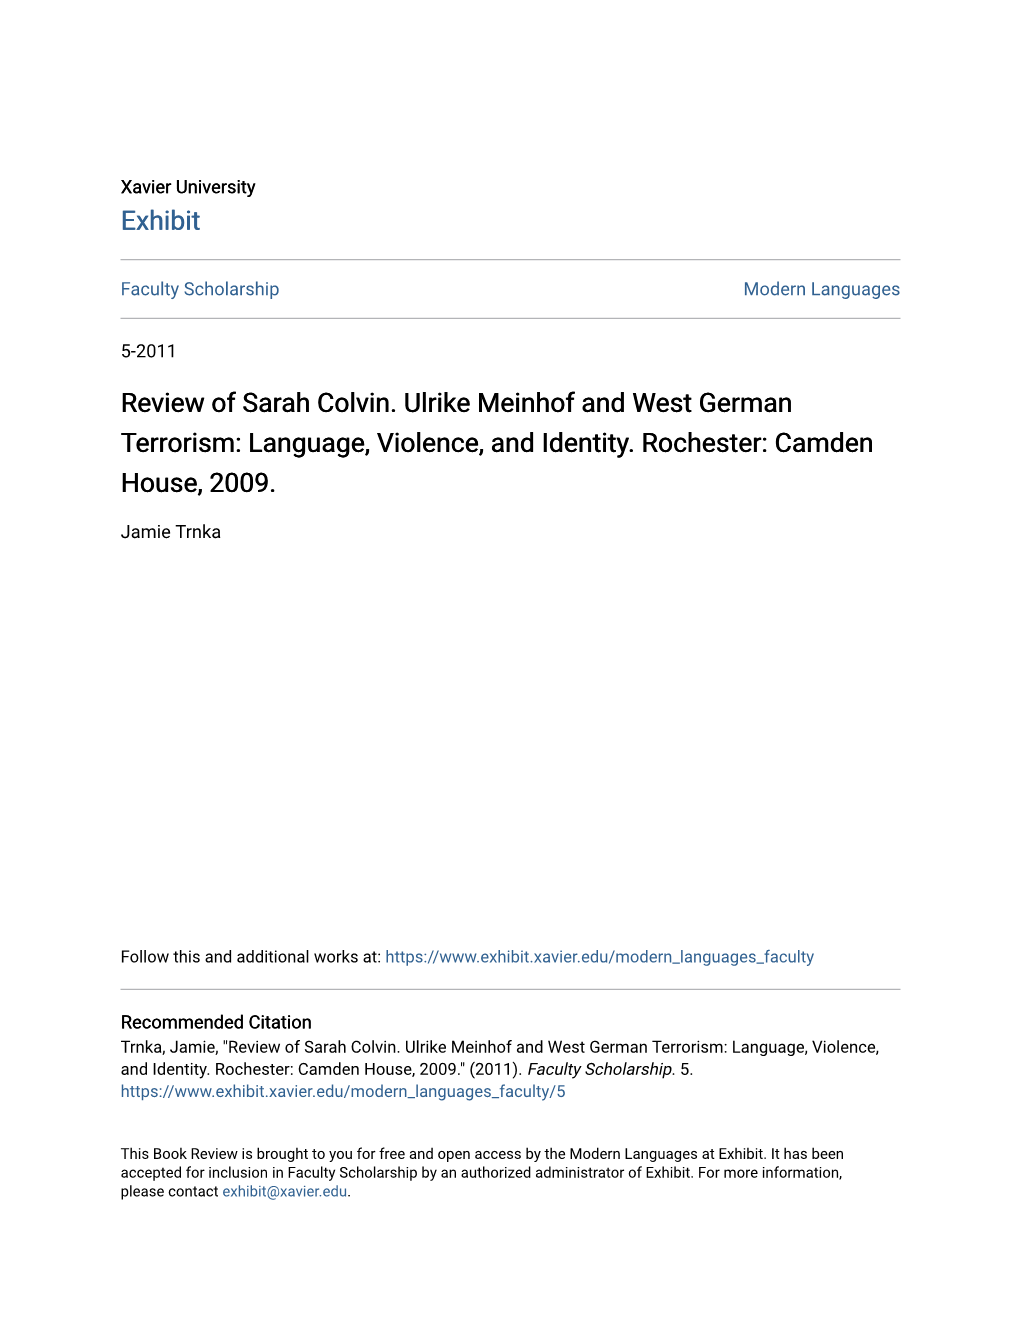 Review of Sarah Colvin. Ulrike Meinhof and West German Terrorism: Language, Violence, and Identity